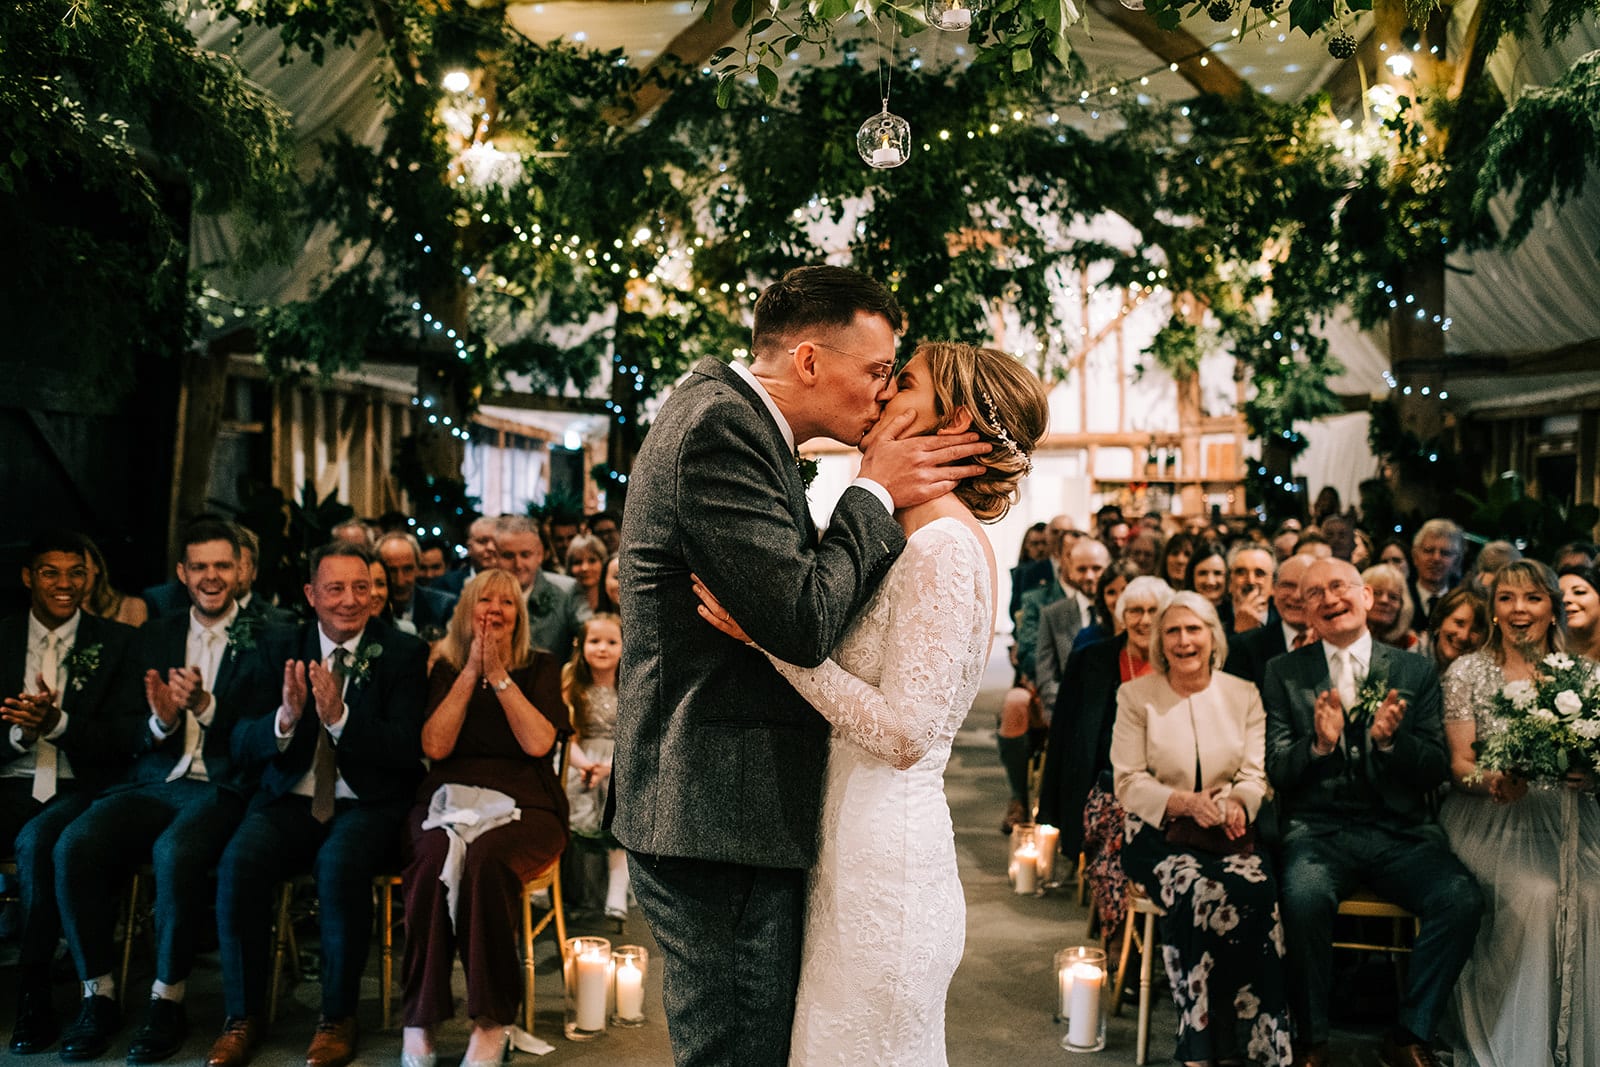 Bride-and-groom-kiss-at-South-Farm-Barn-wedding-ceremony-as-guests-clap-and-look-on-Lee-Allison-Photography